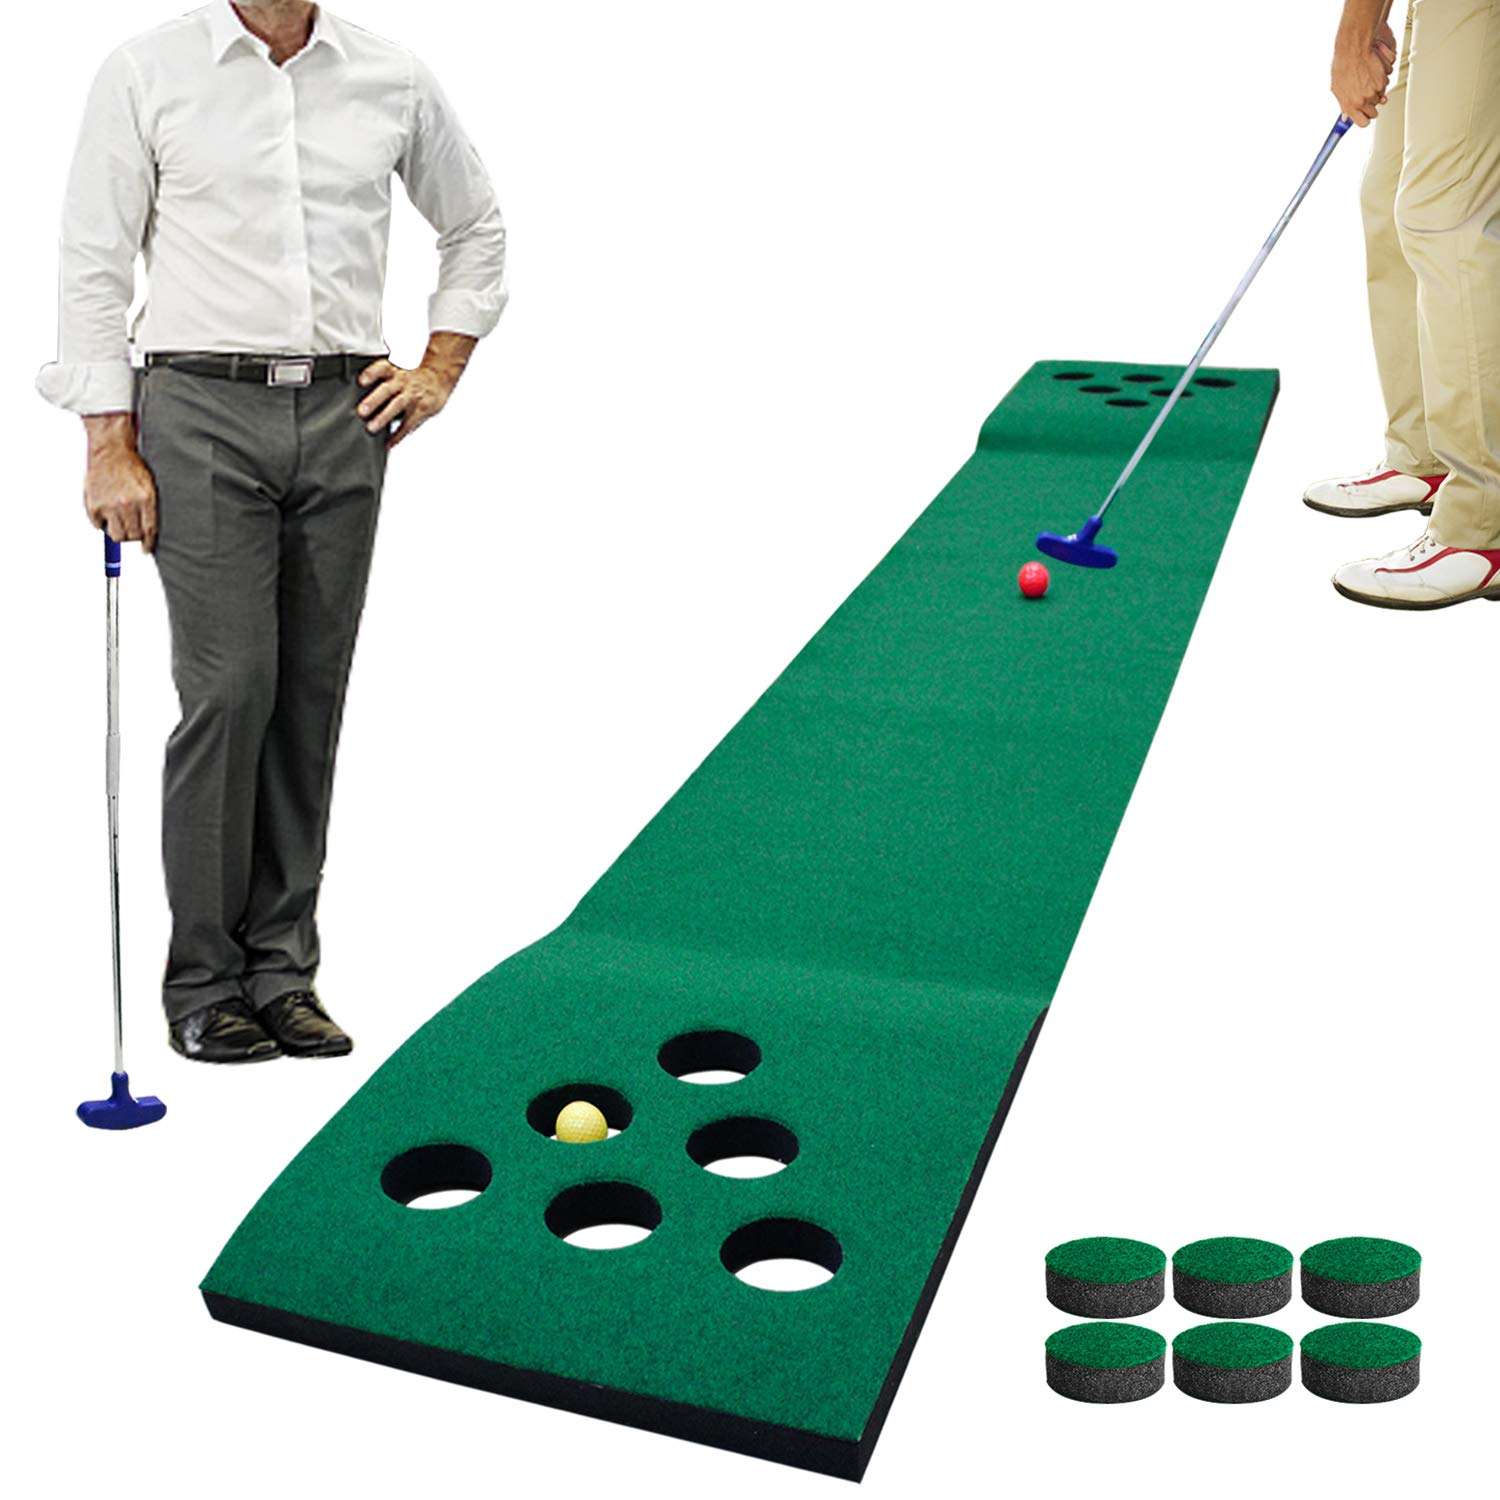 

Golf Putting Green Patice Portable Mat with Auto Ball Return Function Practice Training Aid, Game and Gift